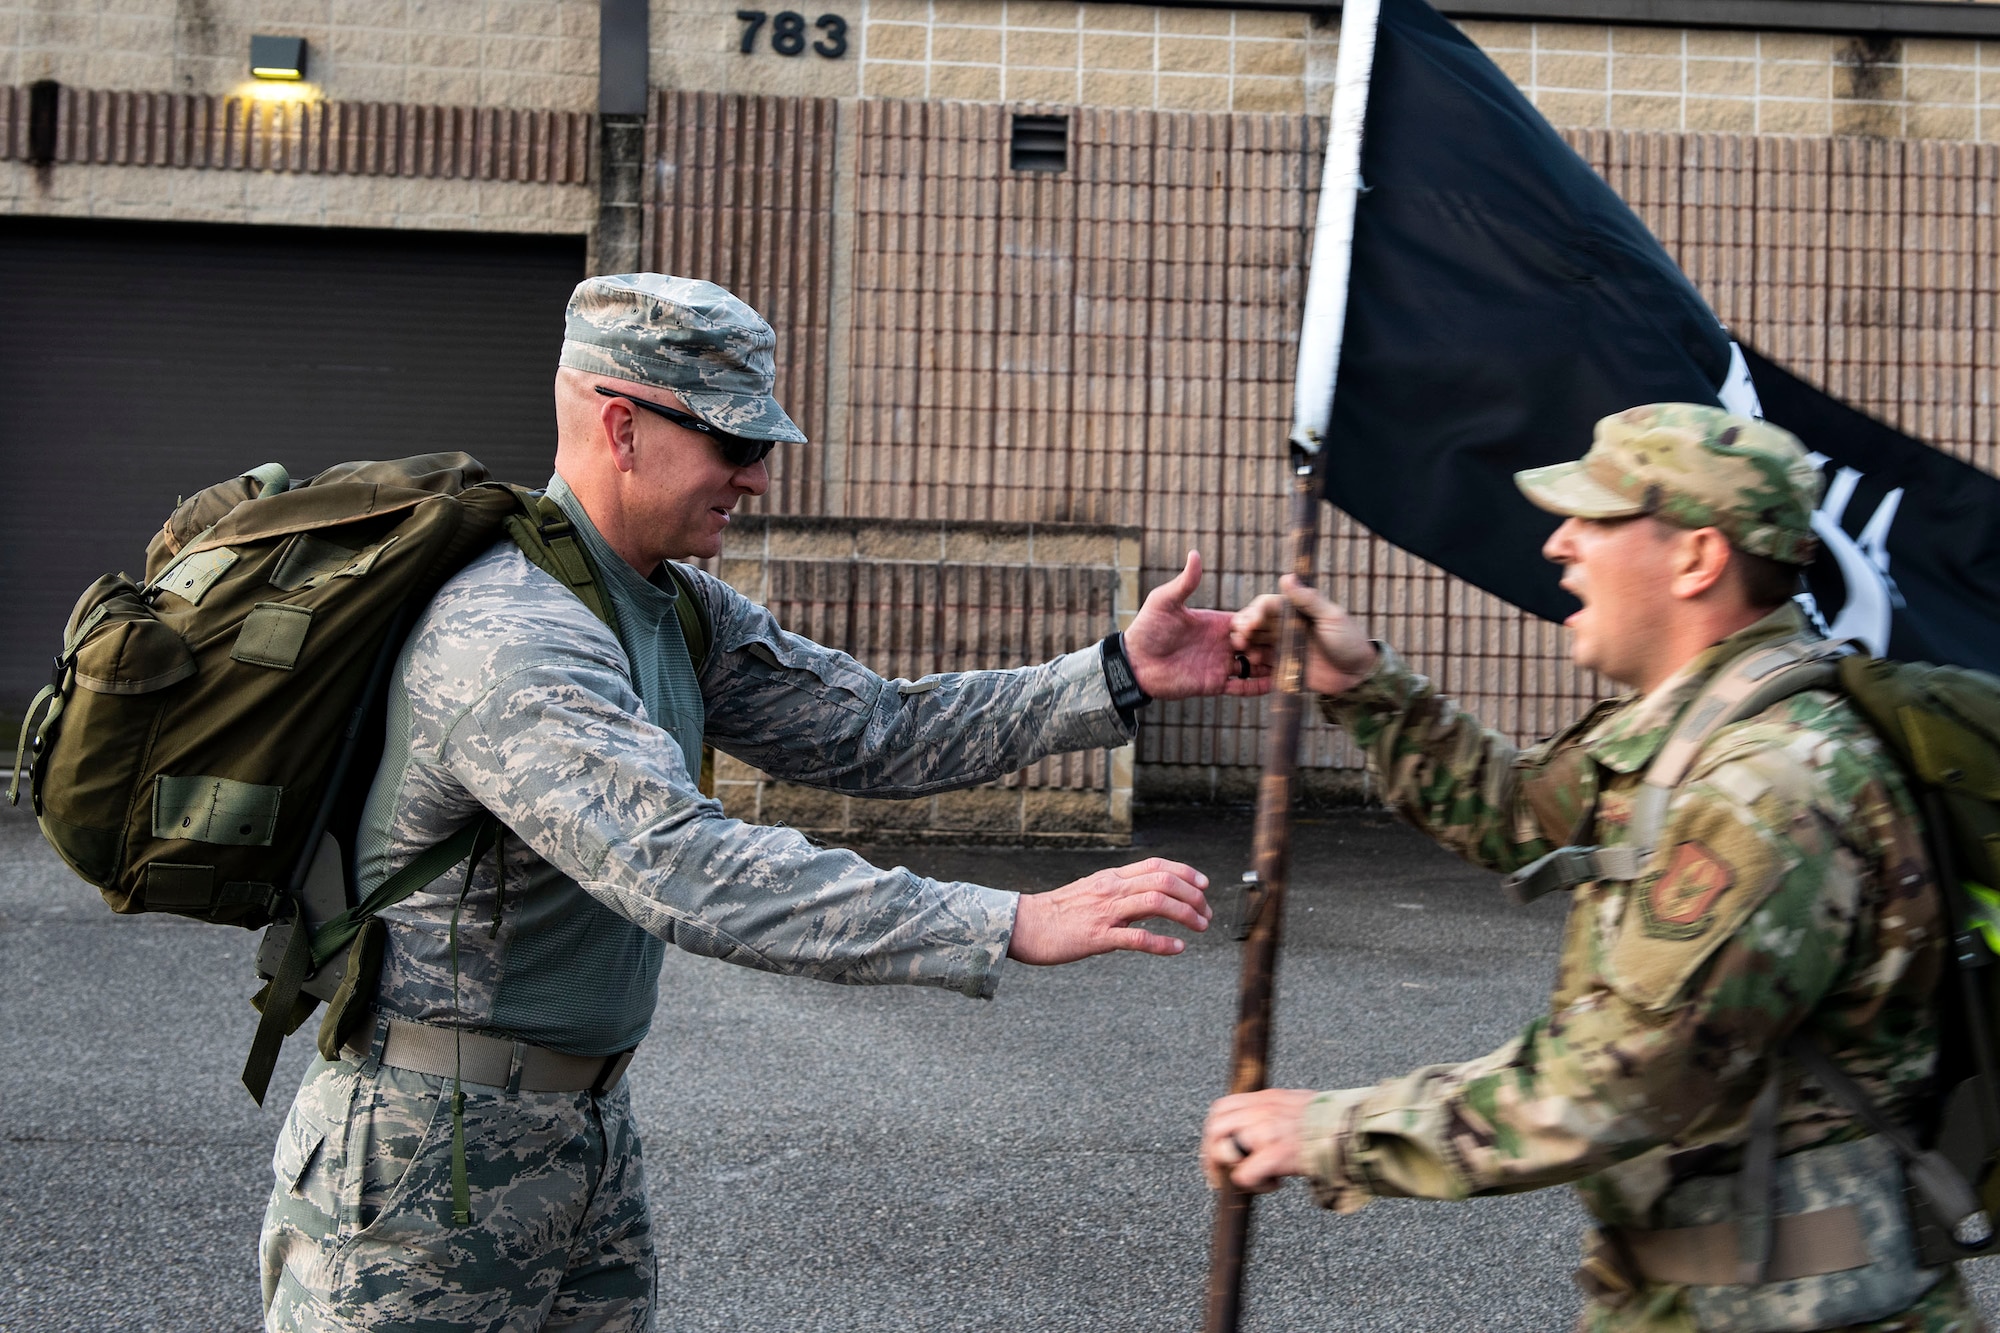 Staff Sgt. Scott Bobeck, left, 23d Maintenance Squadron fuel systems NCO in charge of training, receives the POW/MIA flag from Tech. Sgt. Cody Peterson, 476th Fighter Group occupational safety technician, during the POW/MIA Recognition Day ruck march Sept. 20, 2019, at Moody Air Force Base, Ga. In 1979, the United States Congress passed a resolution authorizing National POW/MIA Recognition Day to be observed together with the national effort of bringing isolated personnel home. The 347th Operations Support Squadron hosted the 24-hour ruck march to pay tribute to those who’ve been captured or missing in the line of duty. (U.S. Air Force photo by Senior Airman Erick Requadt)